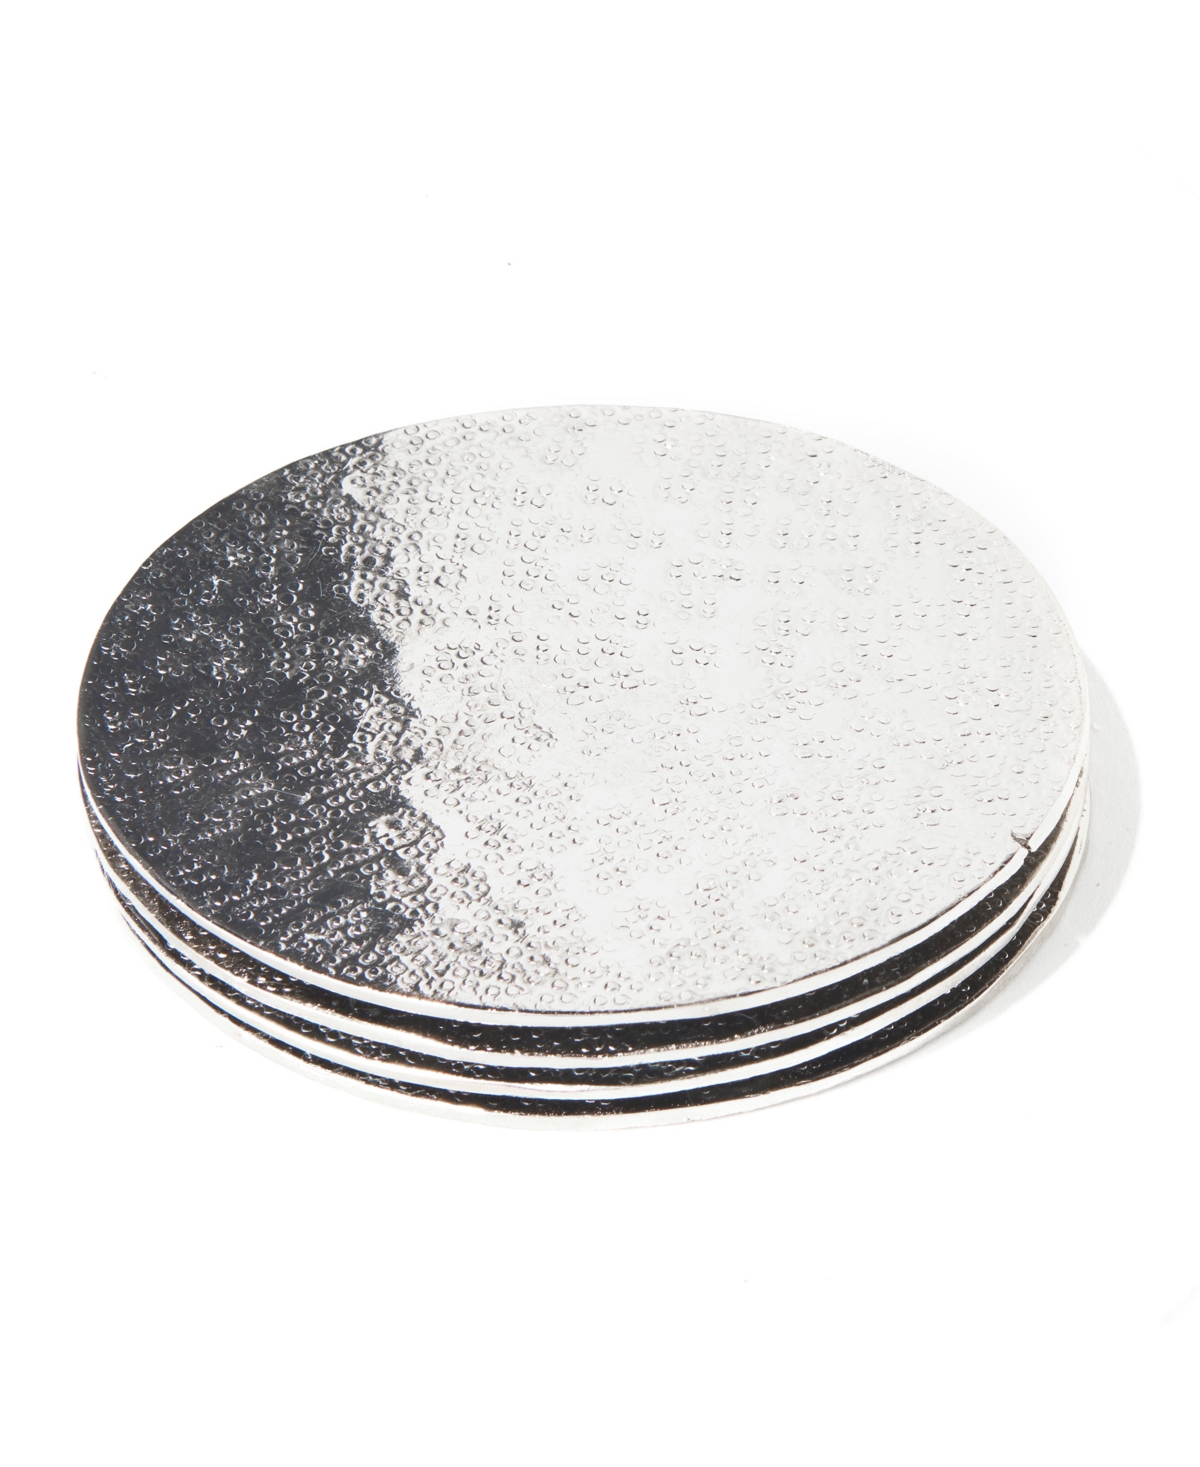 American Atelier Round Coasters Set, 4 Piece In Silver